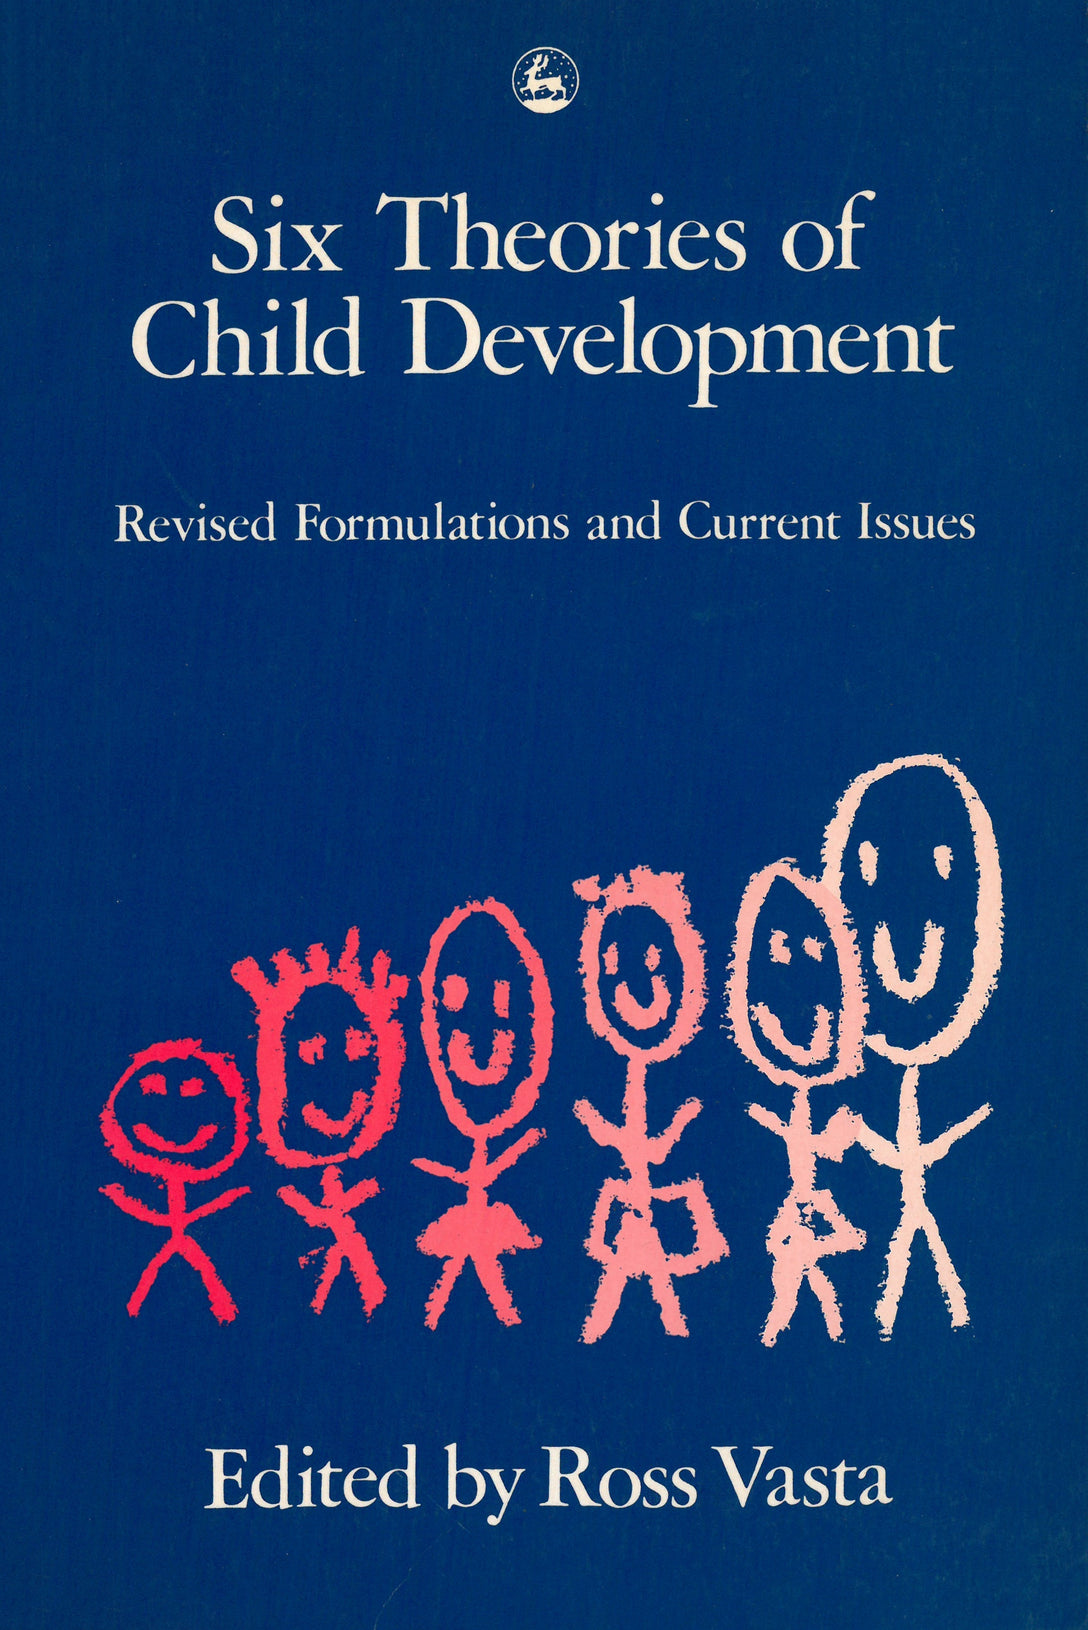 Six Theories of Child Development by Ross Vasta, No Author Listed